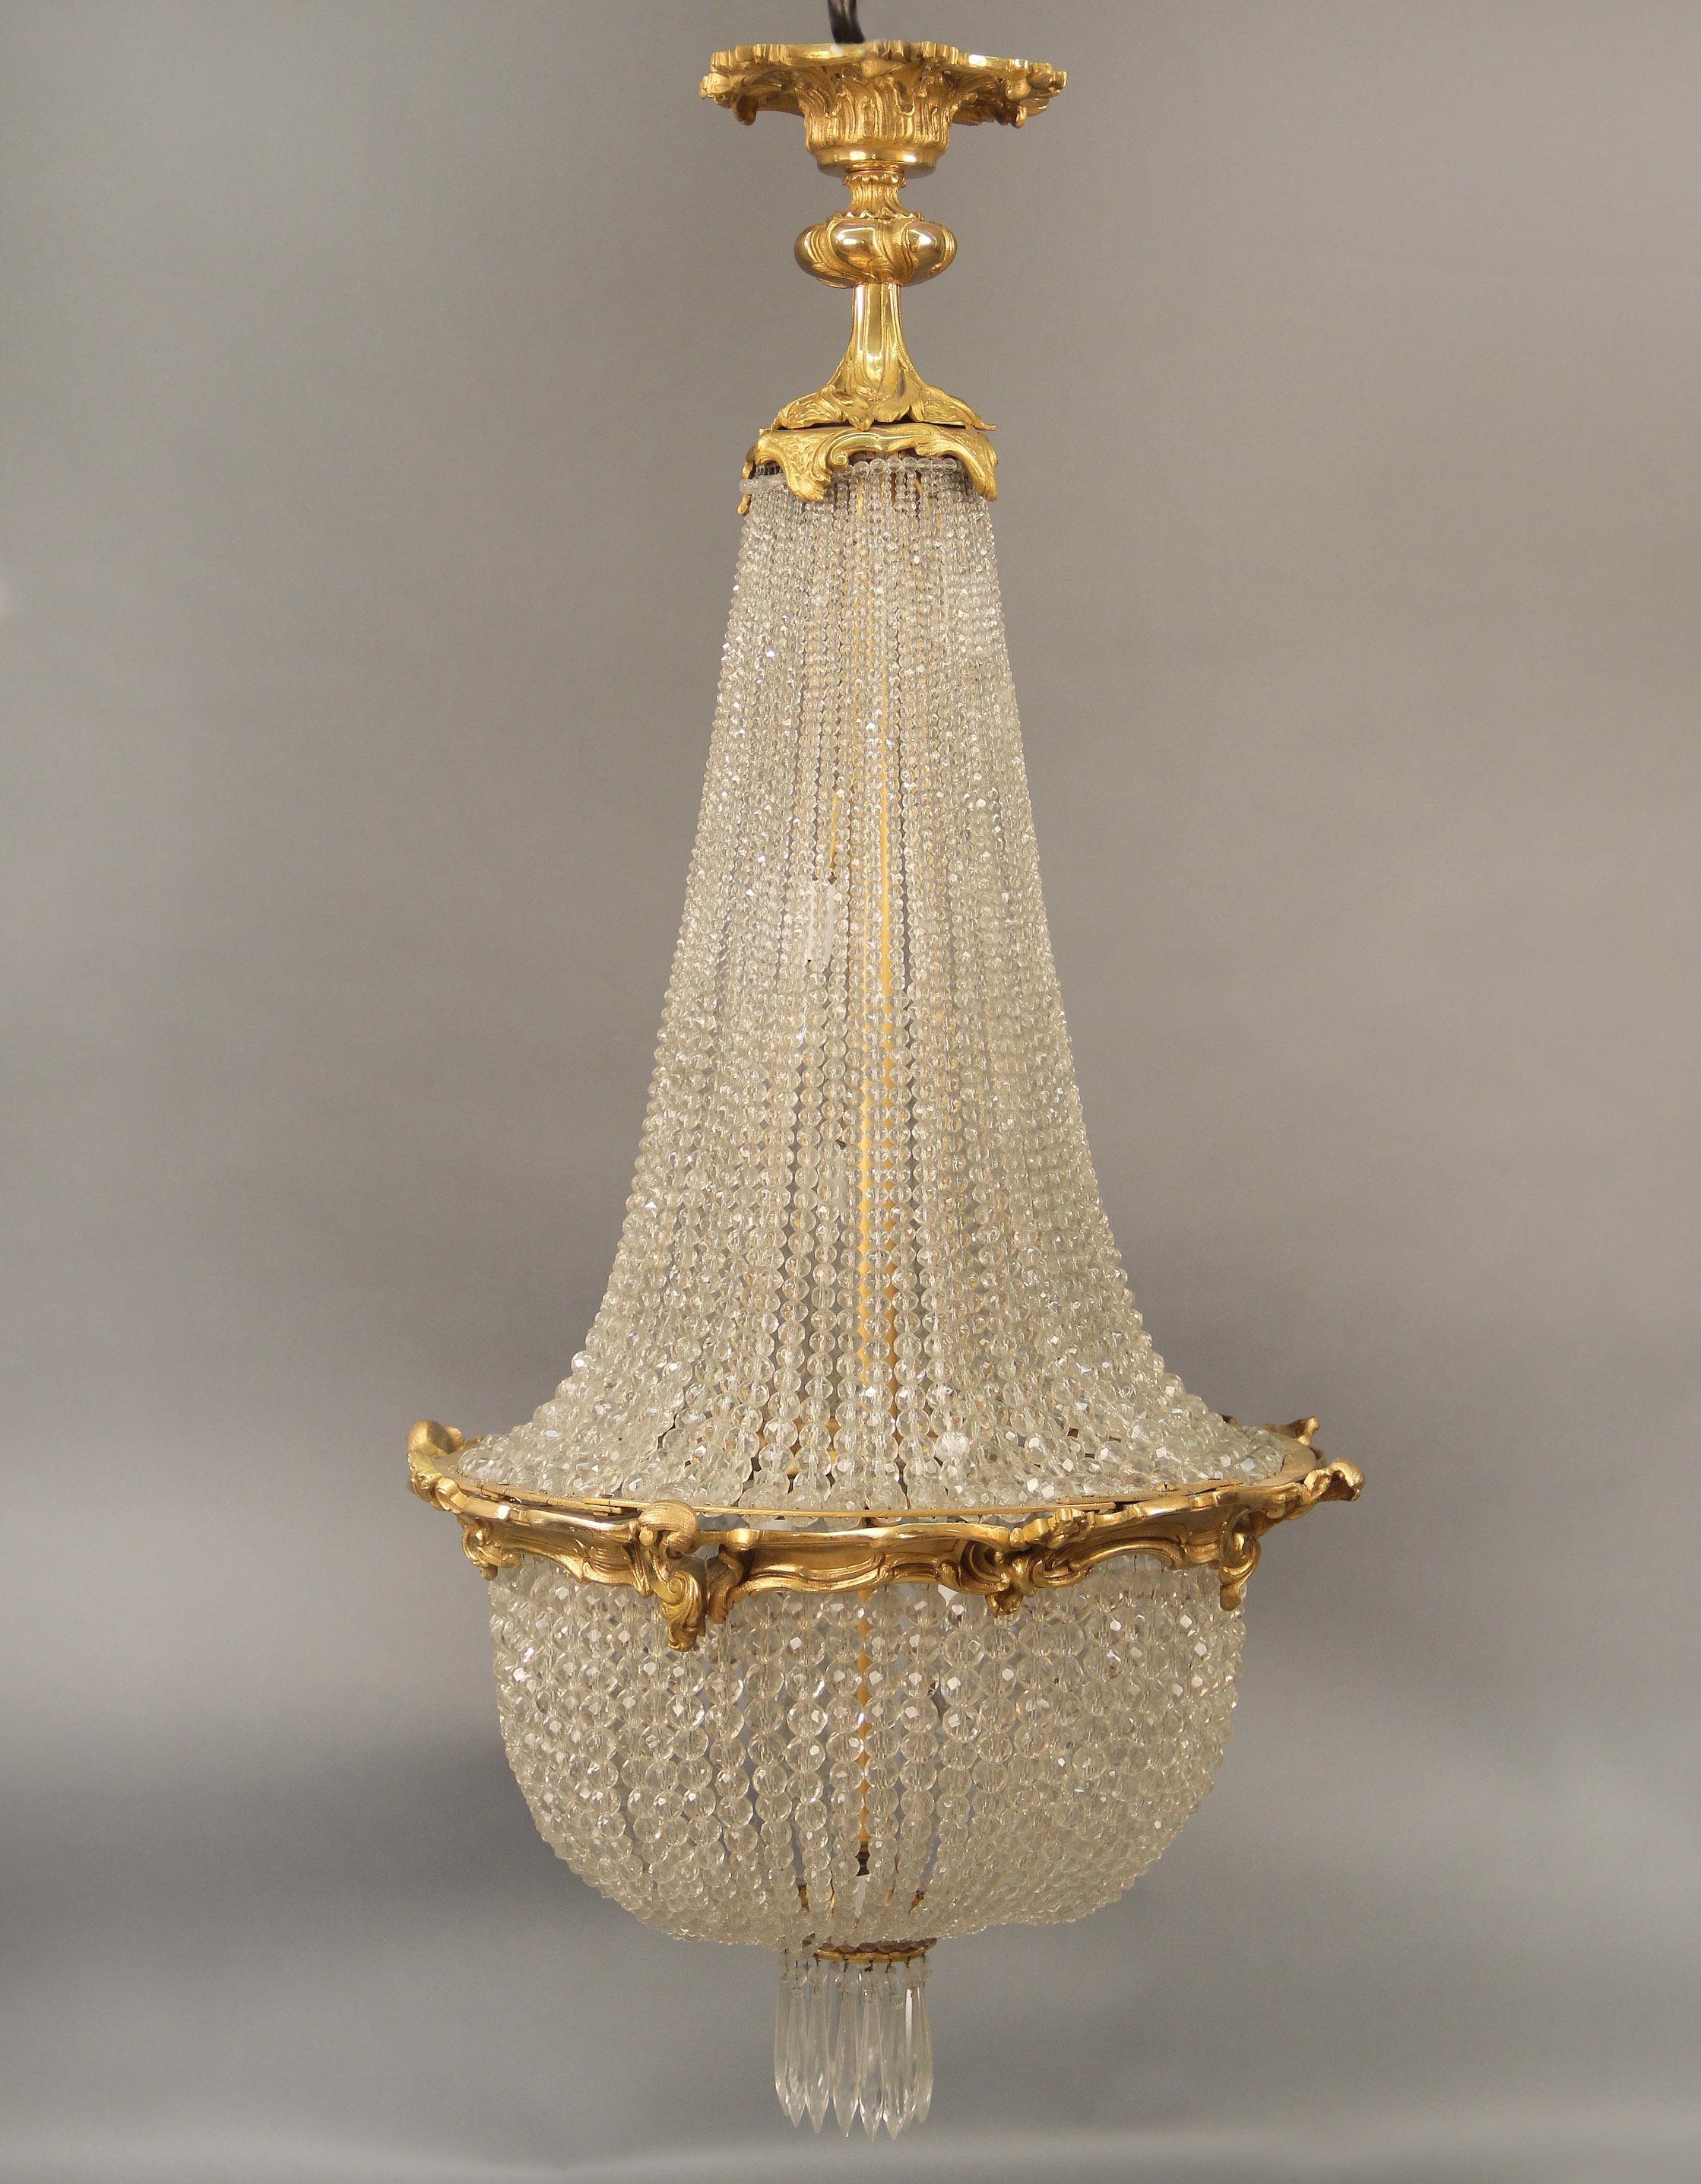 A Late 19th Century Gilt Bronze and Crystal Seven Light Basket Chandelier

The large bronze crown with flowing beads leading down to a basket with drop crystals, seven tiered interior lights.